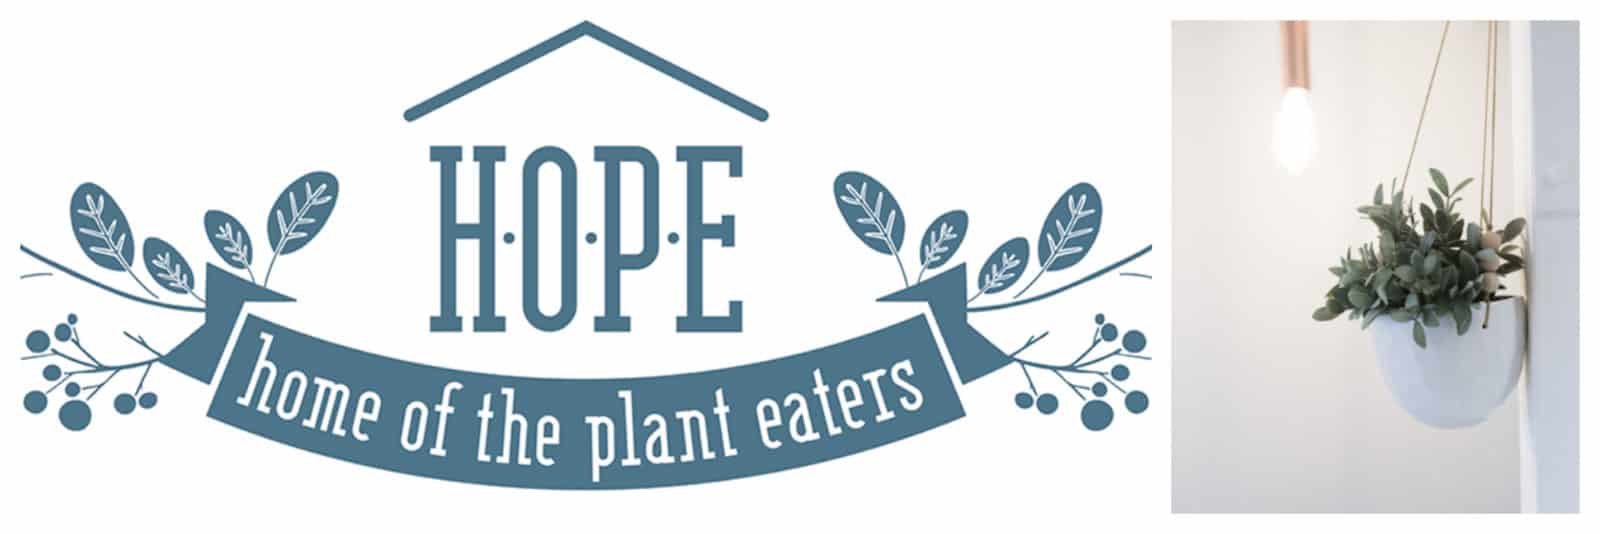 One of our go-to spots for vegan and veggie burgers in Paris is HOPE restaurant tucked in the Marais neighbourhood.